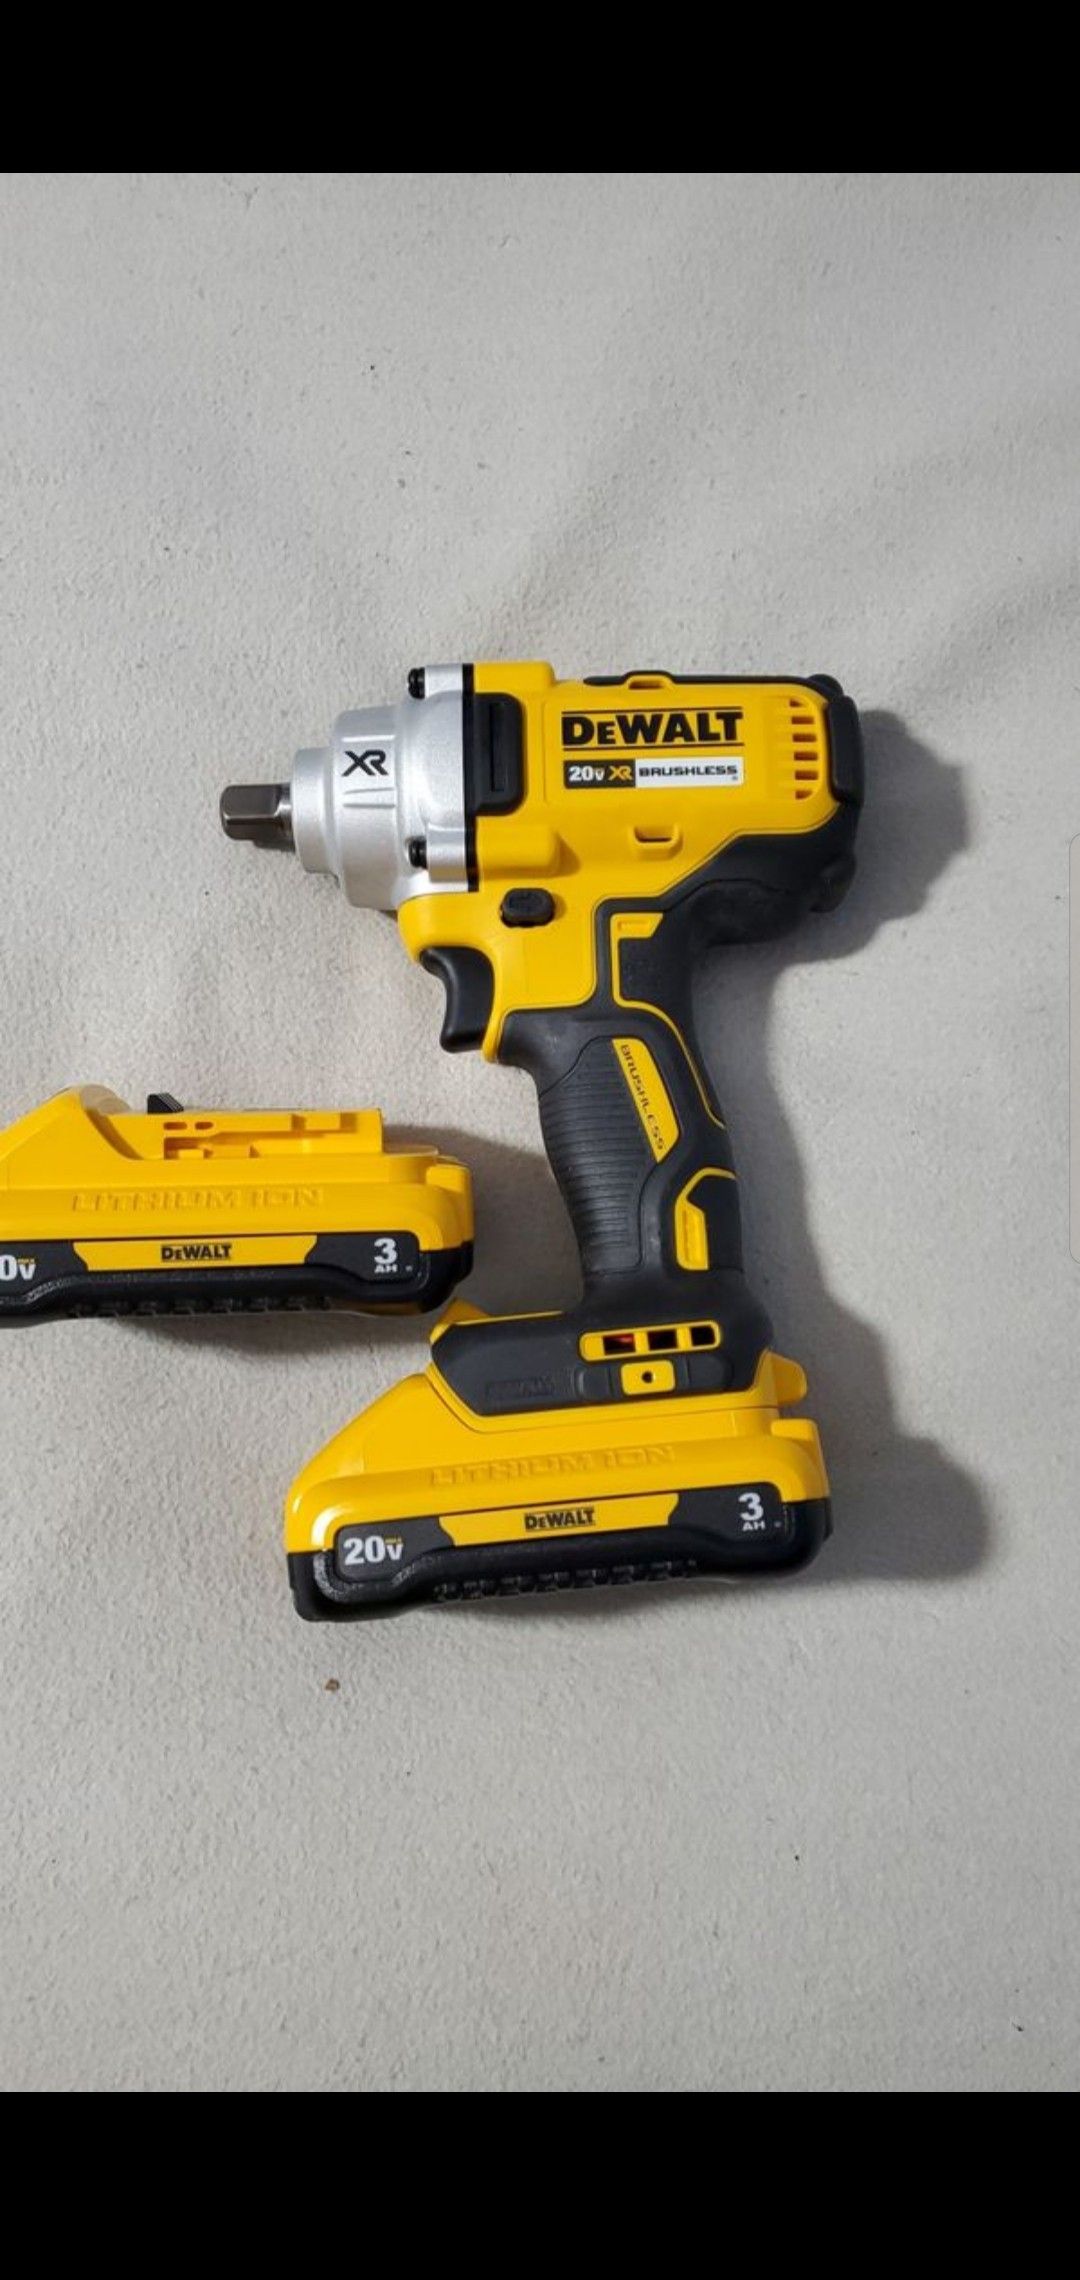 Dewalt 20V Max XR Brushless 1/2in Impact Wrench. With 2 new 3ah batteries.